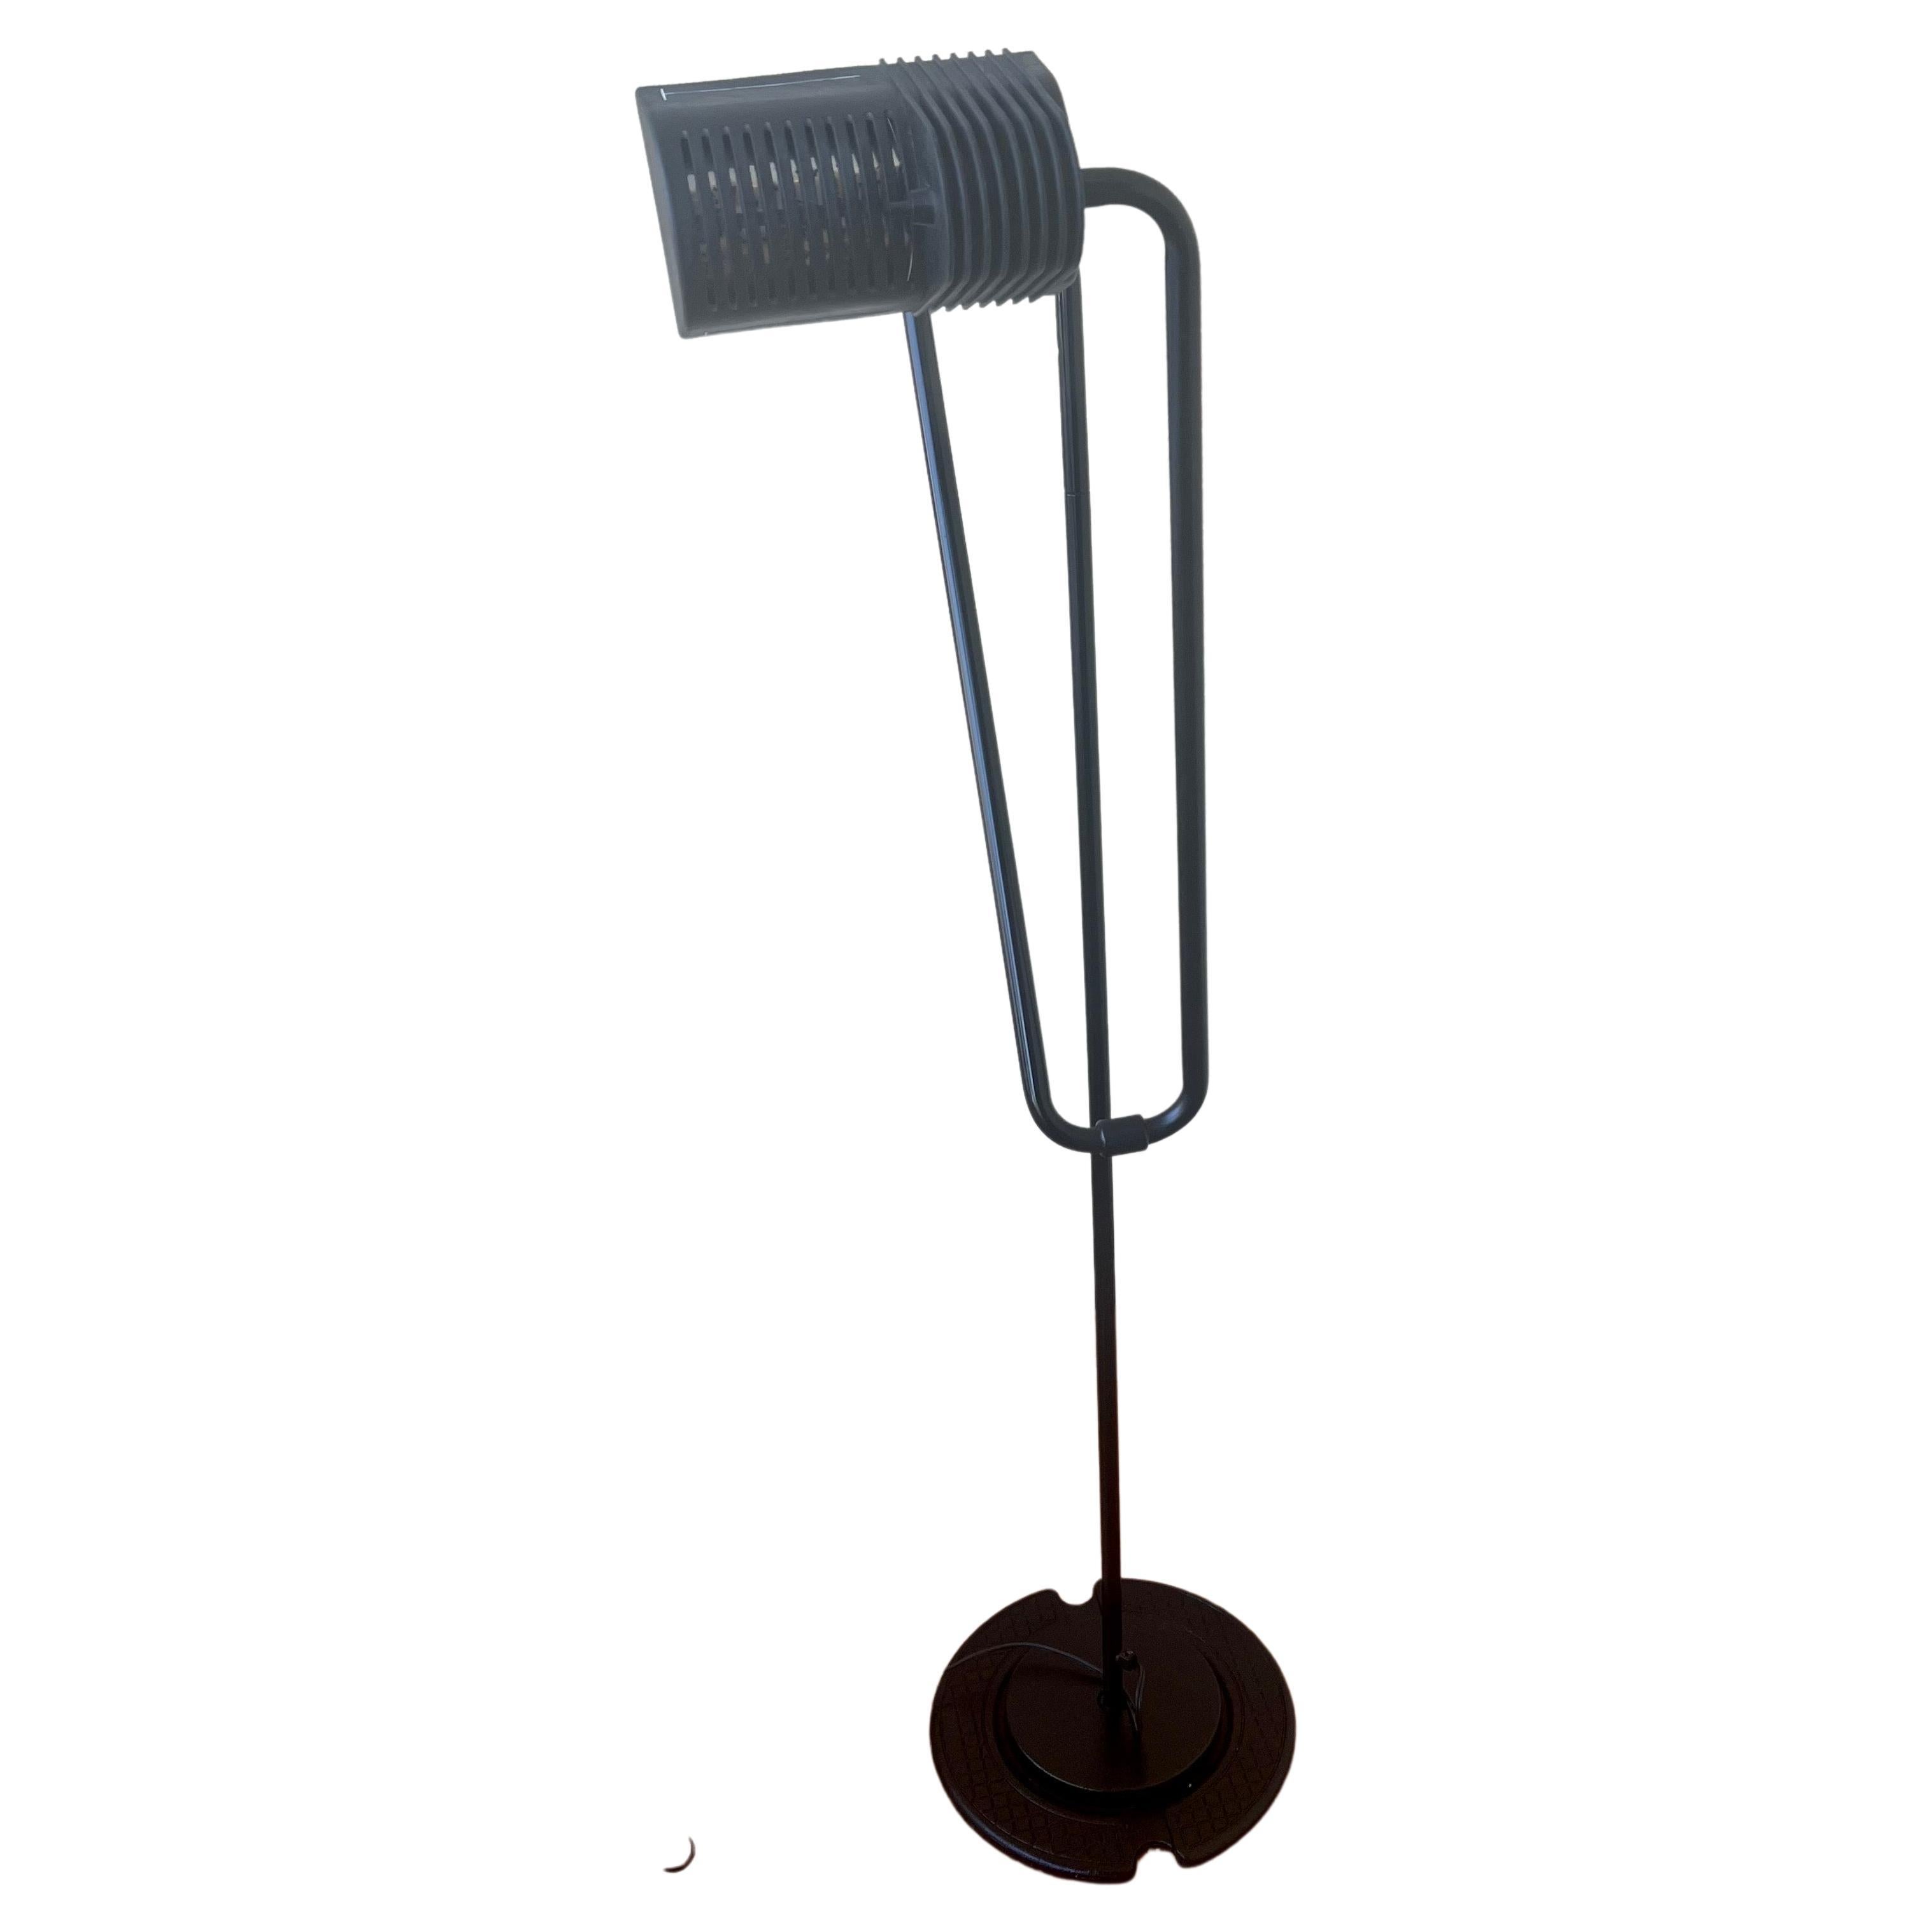 Very rare and in great condition multidirectional floor lamp by Hannes Wettstein for Belux, circa 1980's base is steel with metal enameled piping and movable shade with push off/ on switch, and the arm extends up to 7 feet tall. with an 11